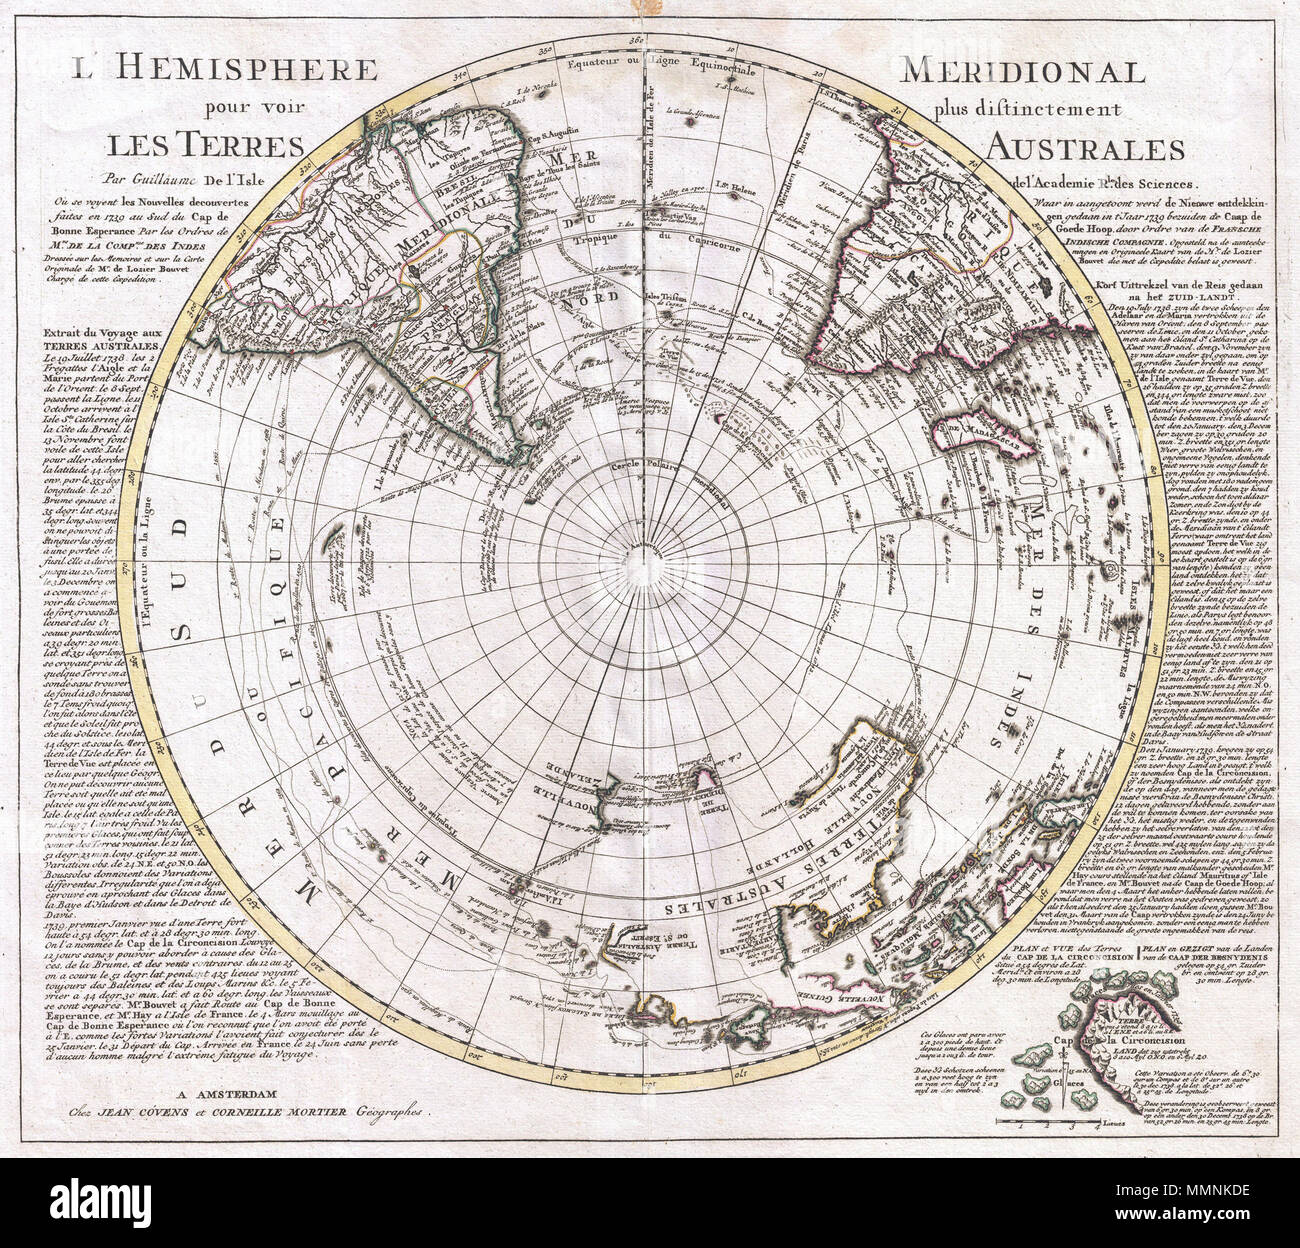 .  English: This is a stunning map of the Southern Hemisphere originally drawn by Guillaume de L'Isle and updated in 1739 by Covens and Mortier. Extends from the South Pole northwards in all directions as far as the Equator, encompassing in the process most of South America, southern Africa, Australia, and parts of the East Indies including Borneo, New Guinea, Java and Sumatra. Details the routes taken by numerous explorers including Magellan, Vespucci, Mendana, Dampier, L'Aigle, S. Louis, Halley, Quiros, Maire, Tasman, Davis and others. Many of the updates to this map over earlier versions fo Stock Photo